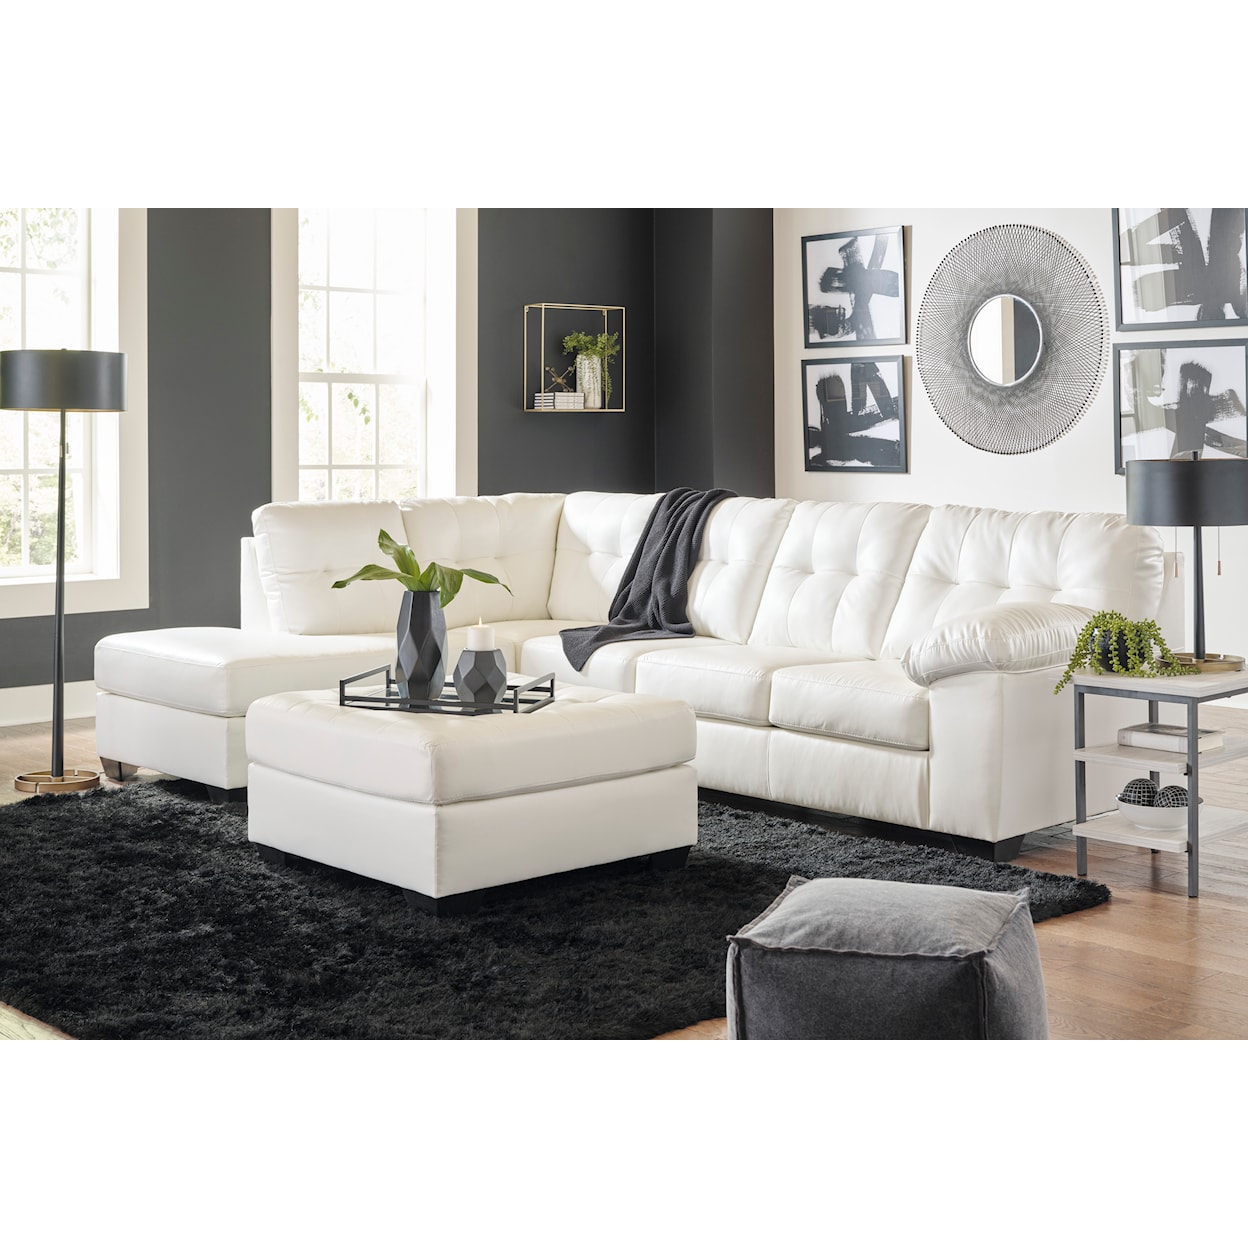 Signature Design by Ashley Donlen Sectional and Ottoman